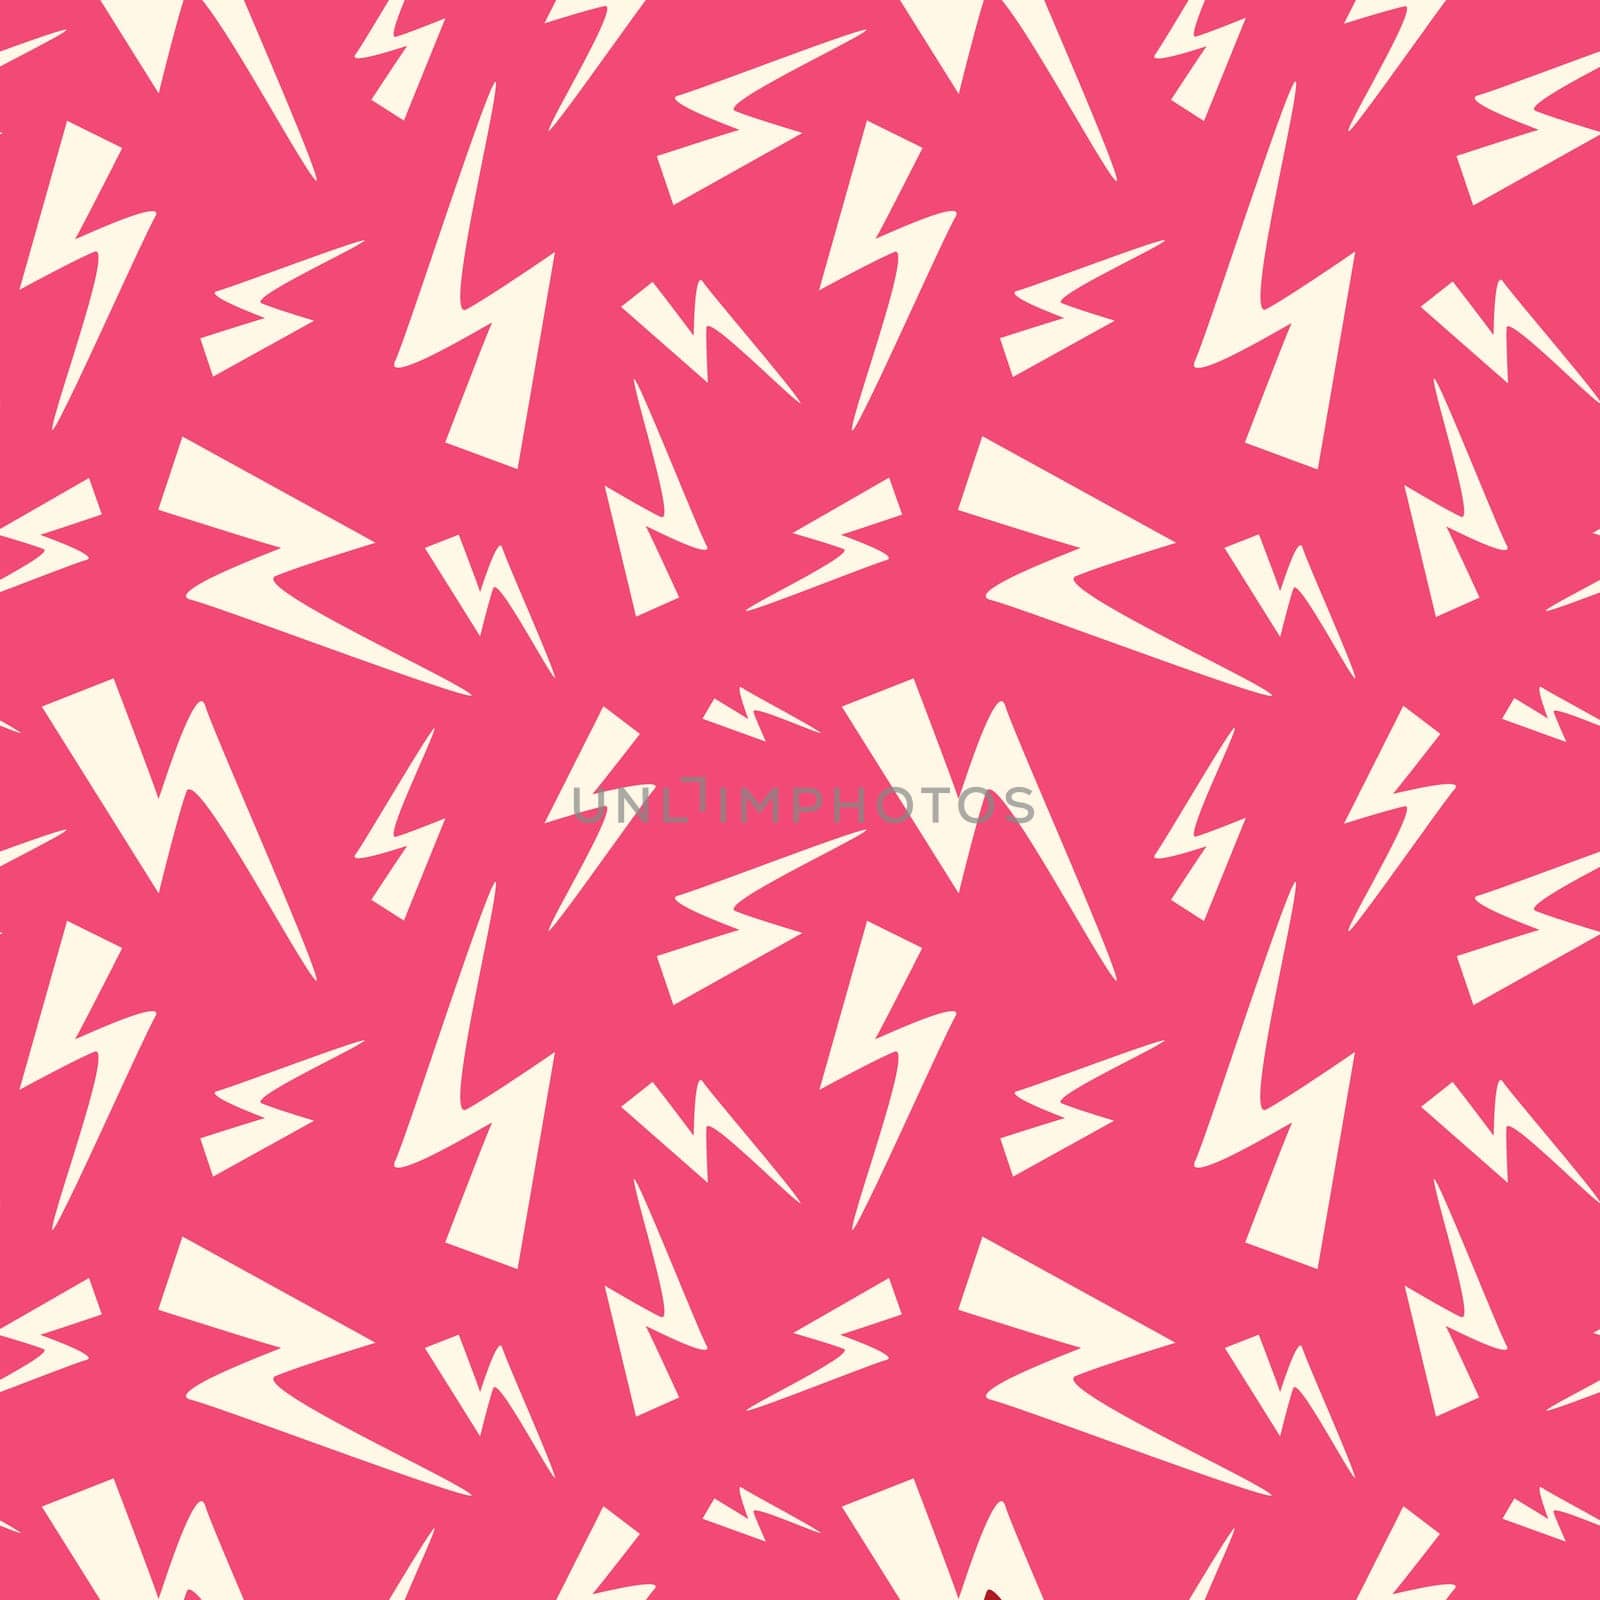 A pink and white pattern of lightning bolts. The pattern is very detailed and the colors are bright and bold. Concept of energy and excitement, as if the lightning bolts are dancing across the fabric